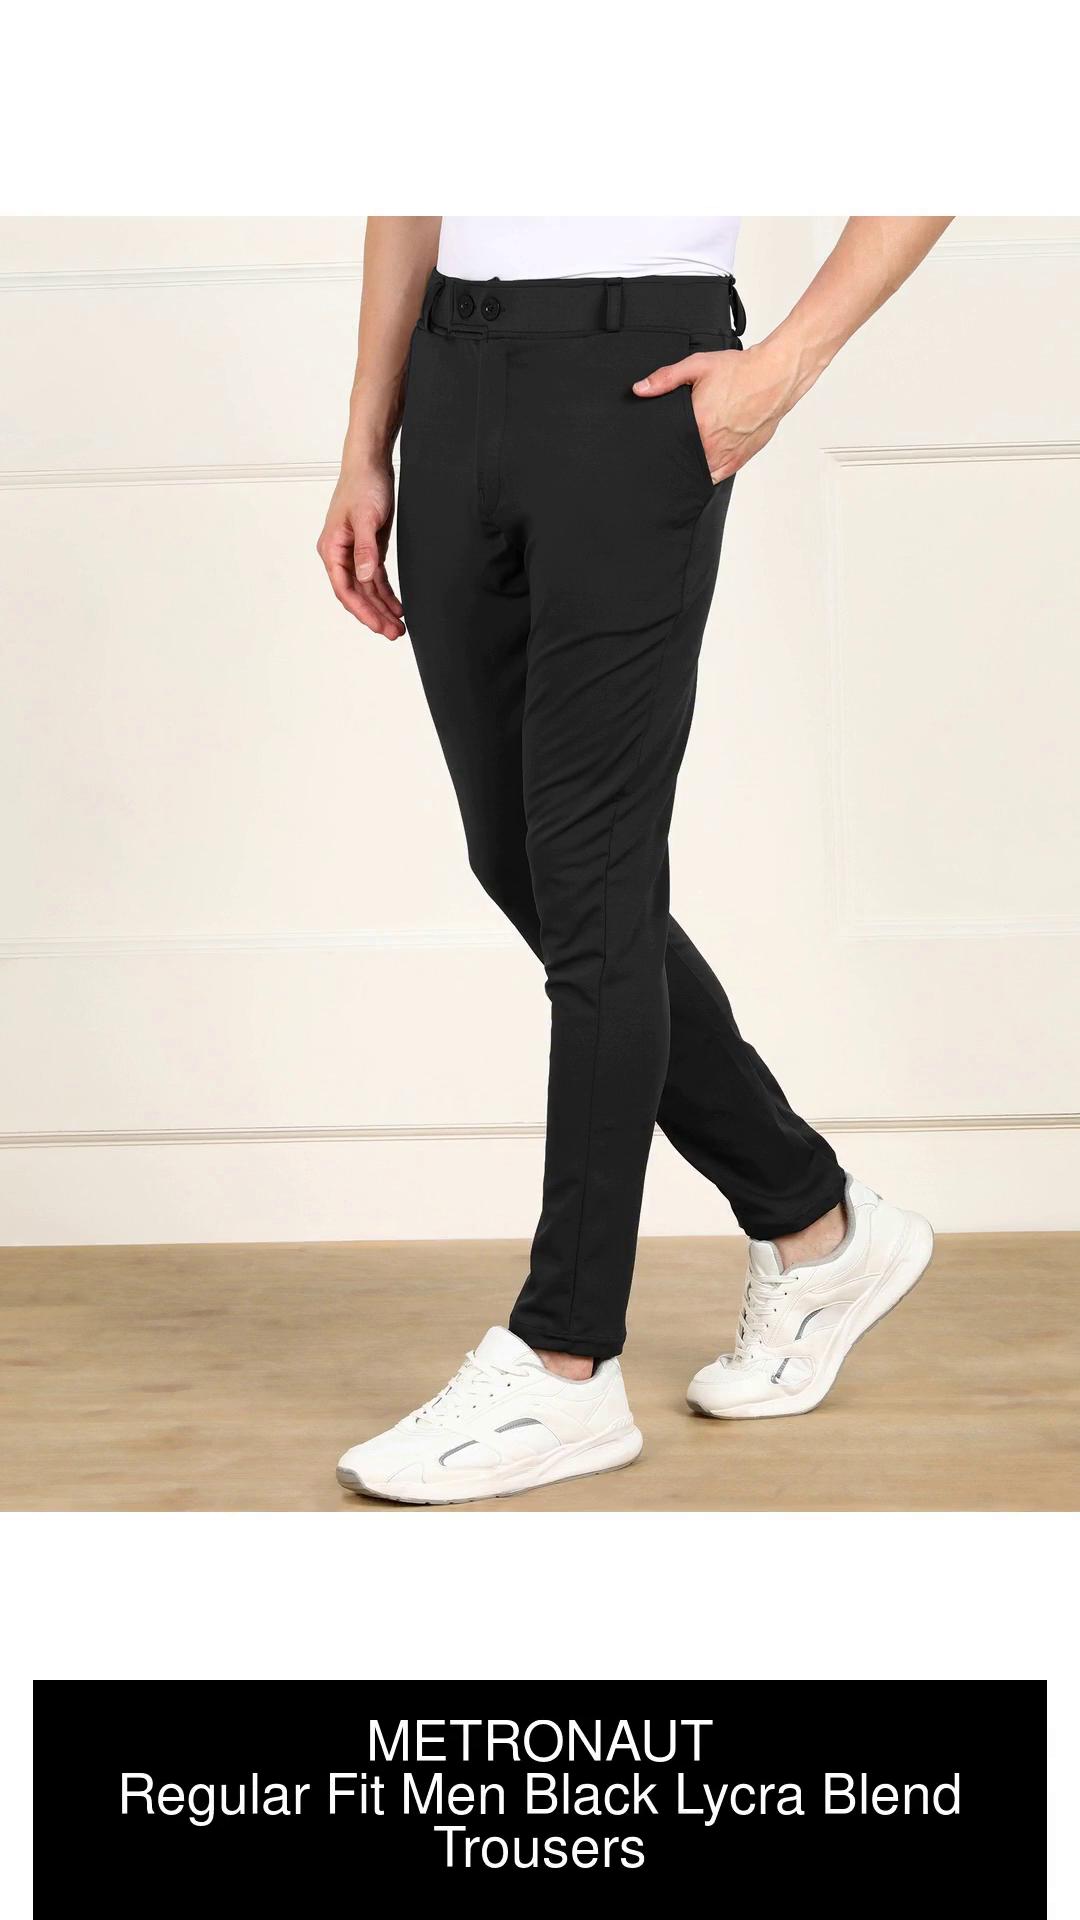 Trousers  spandex  women  383 products  FASHIOLAin